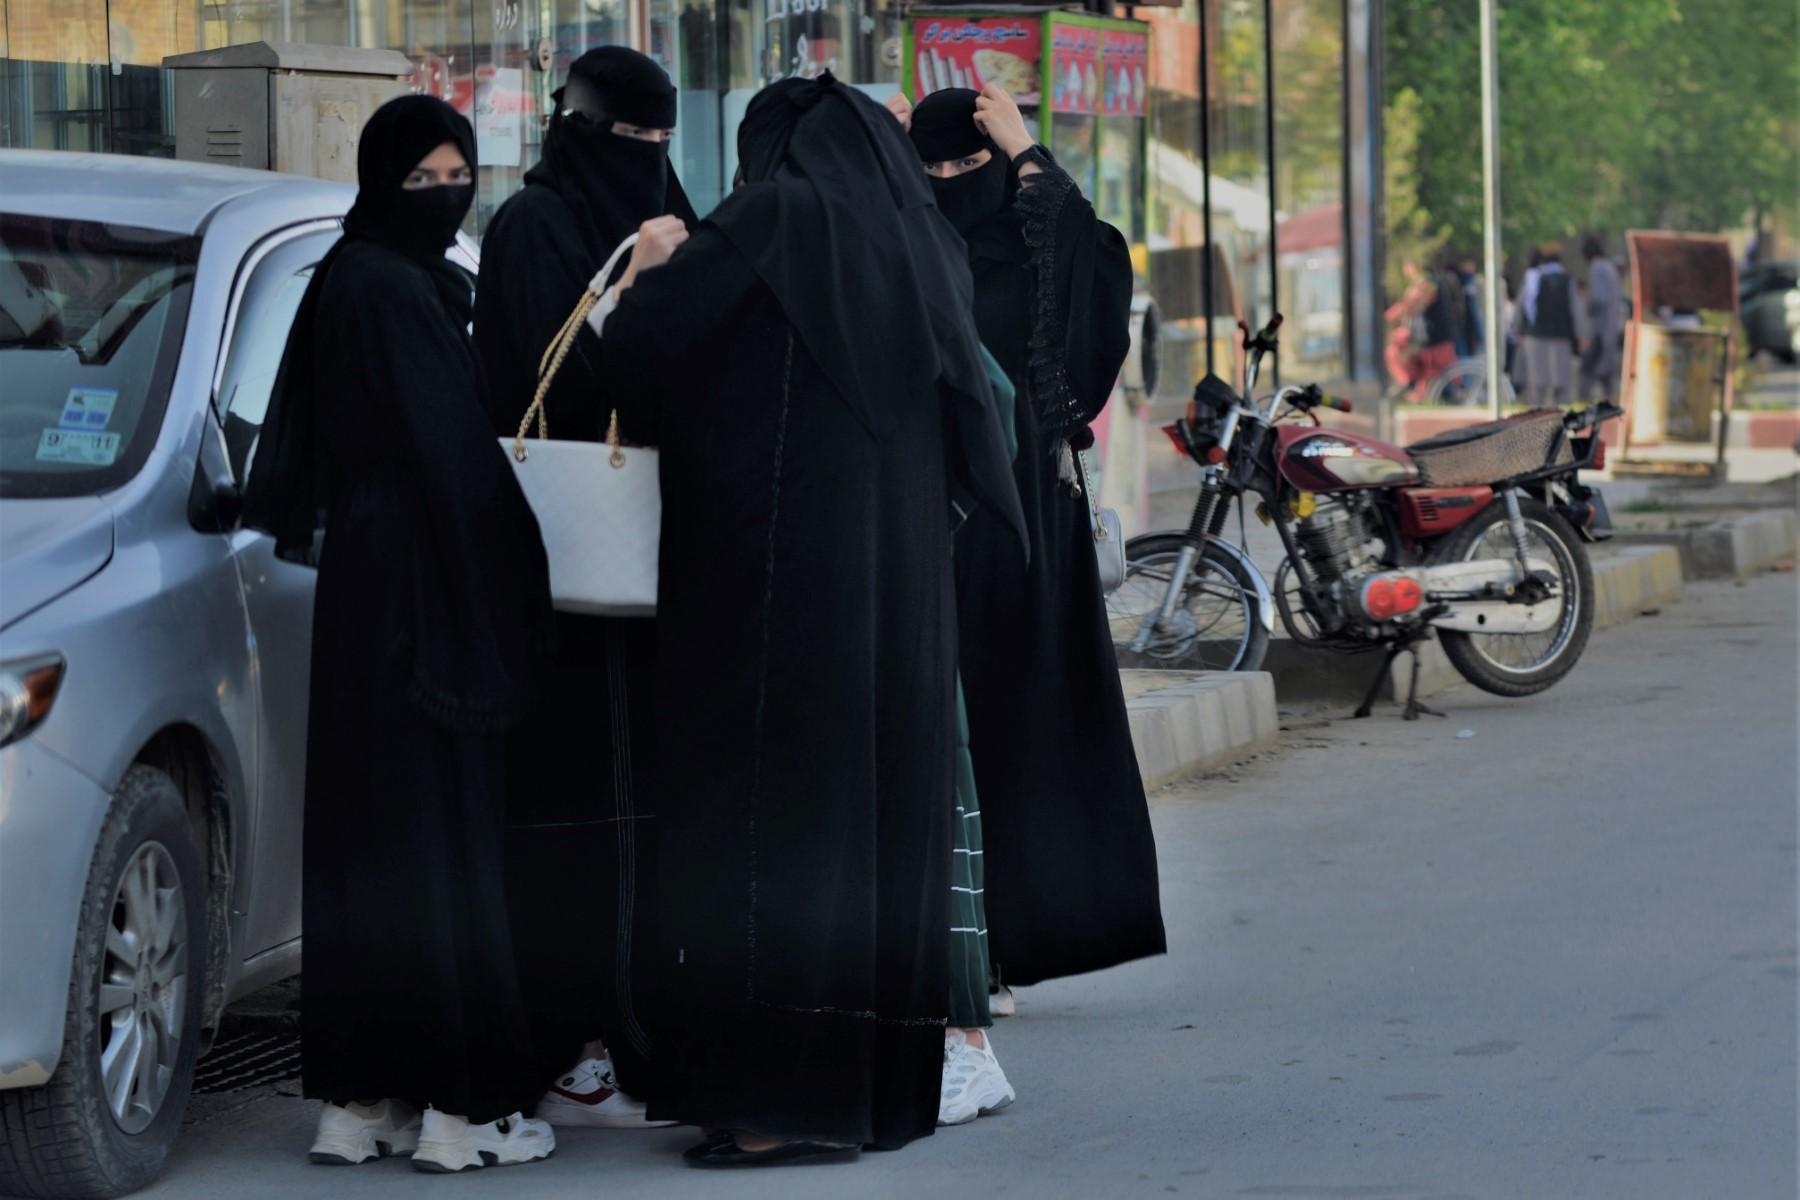 Women wearing Niqab garments stand along a street in Kabul on May 7. Photo: AFP